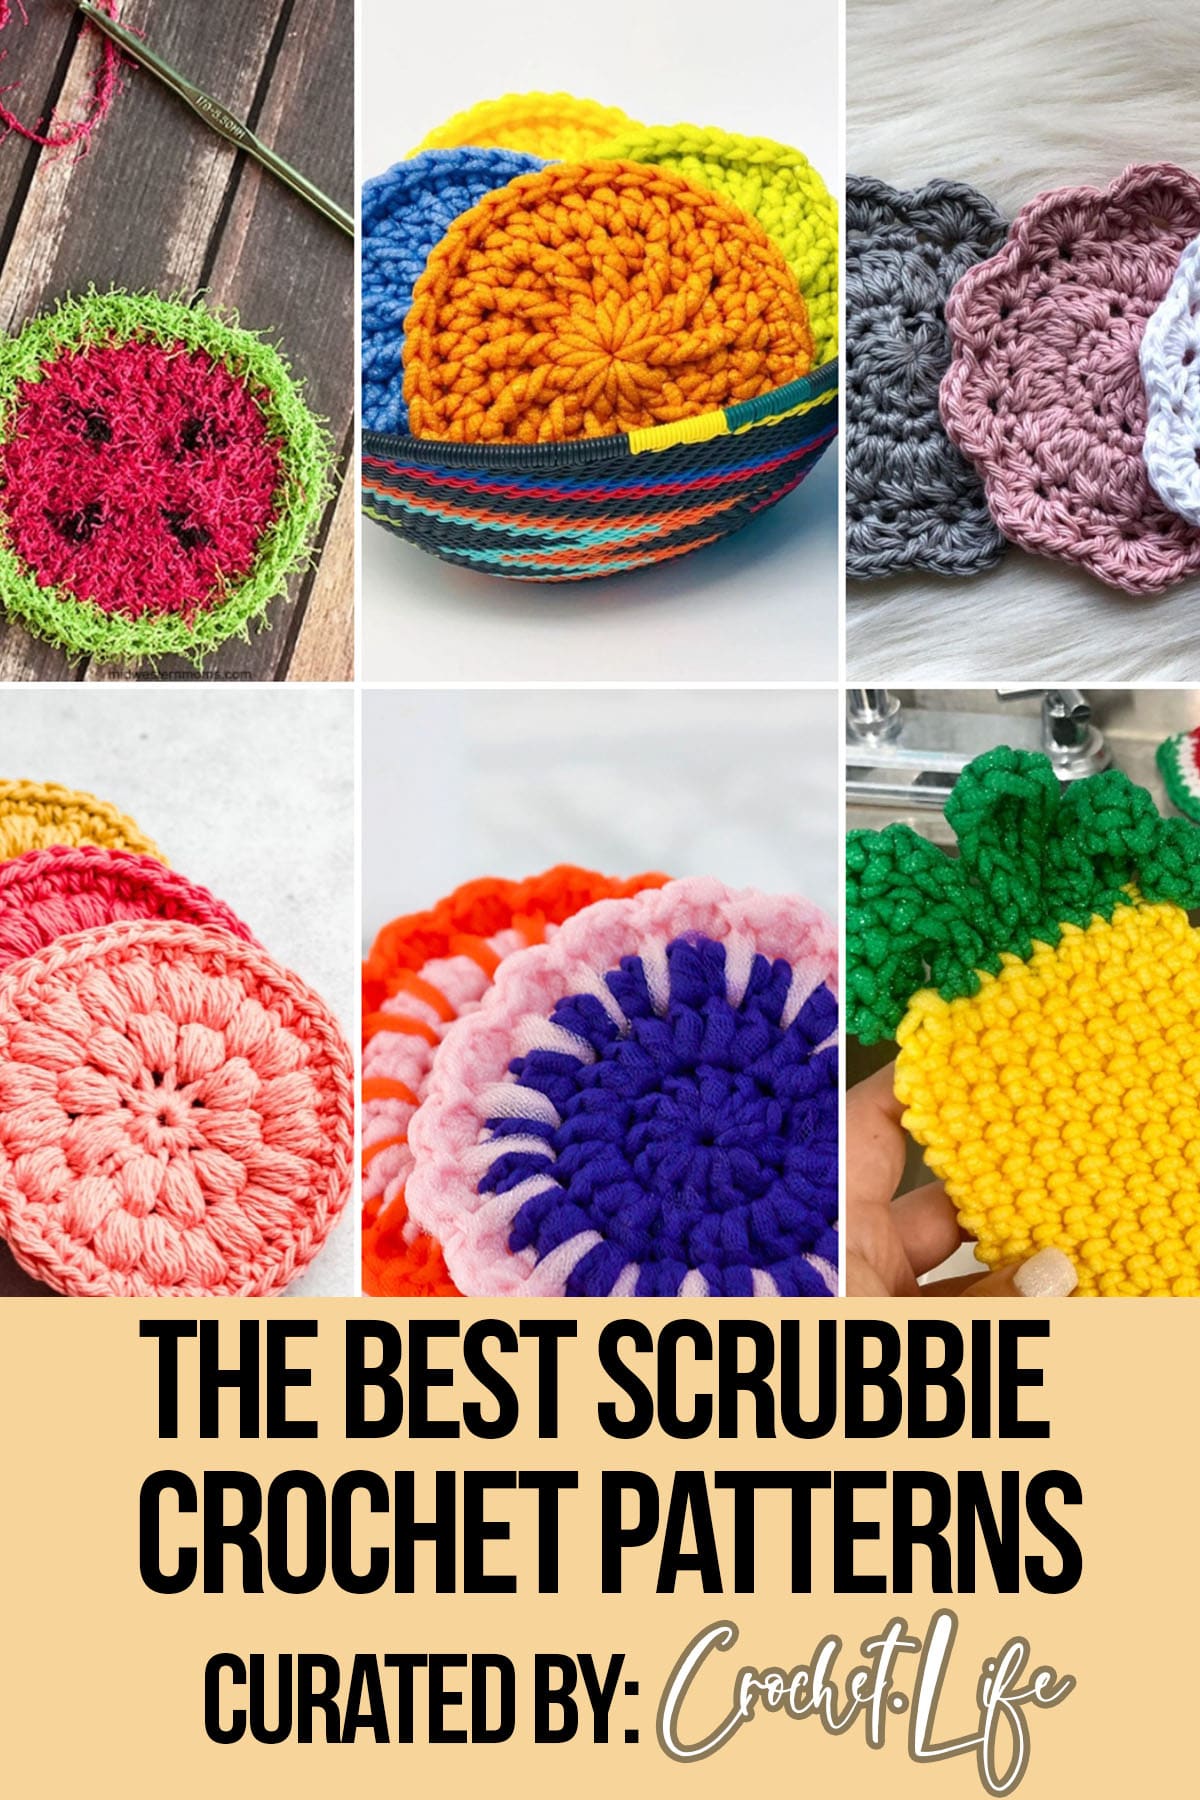 photo collage of crochet patterns for scrubbies with text which reads the best scrubbie crochet patterns curated by crochet.life